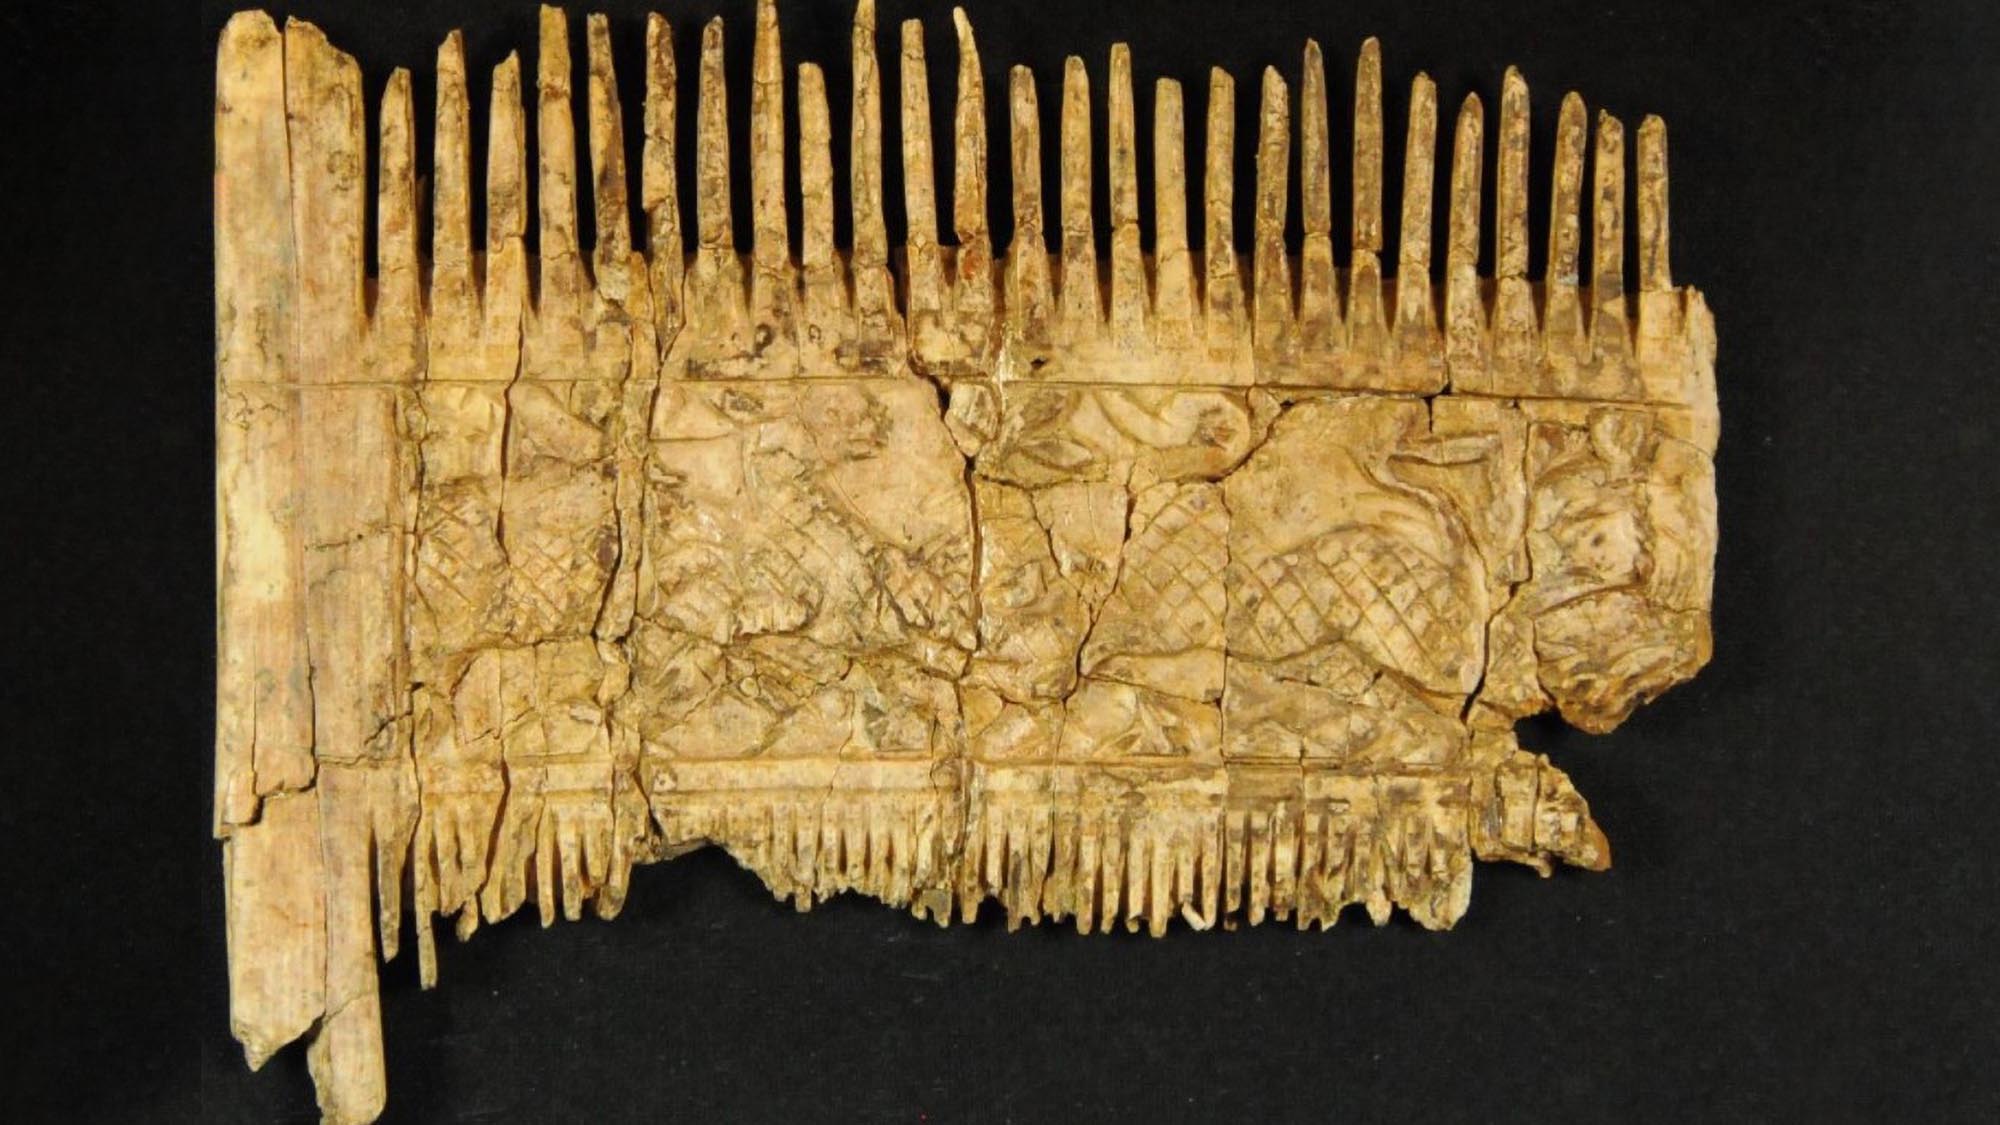 Read more about the article Ornate Ivory Comb And African Bowl Among Objects Found In 6th Century Graves For First Time In North Of Alps